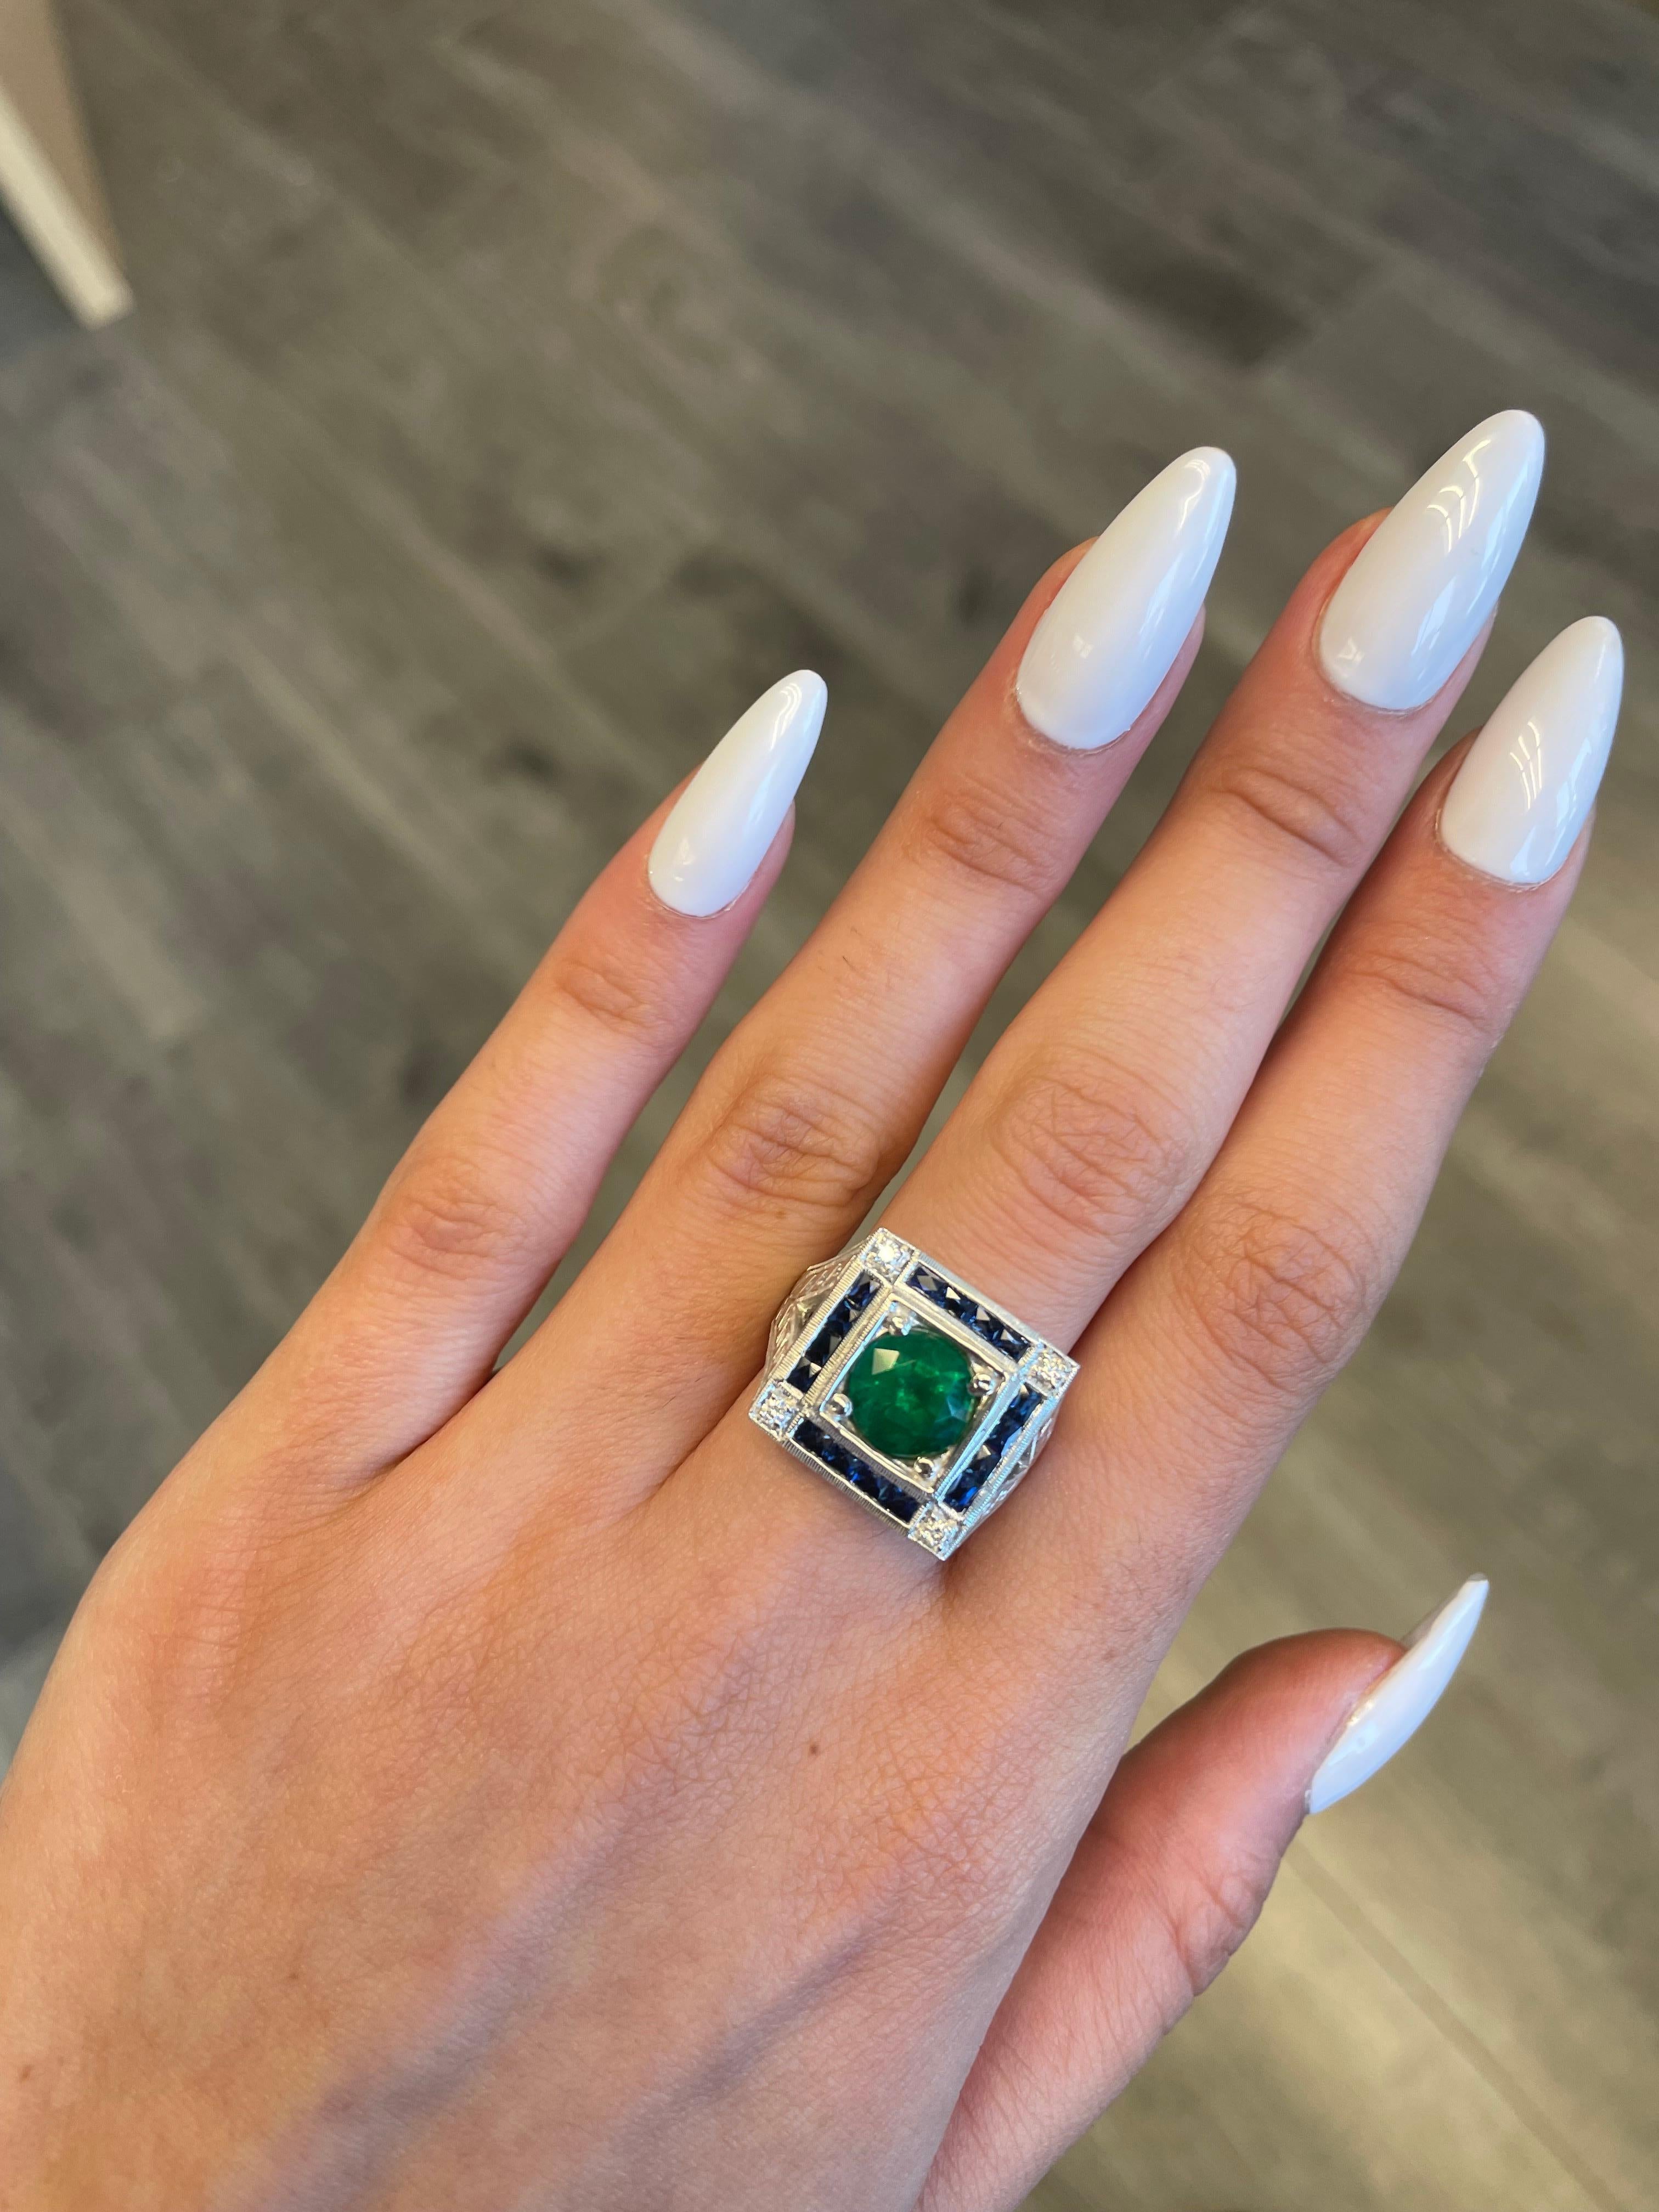 Lovely vintage inspired emerald with sapphires and diamond ring.
2.47 carat round emerald apx F2 complimented with 1.20ct of french cut sapphires heat and 0.10ct of round brilliant diamonds. Approximately G/H color and SI clarity. 18-karat white